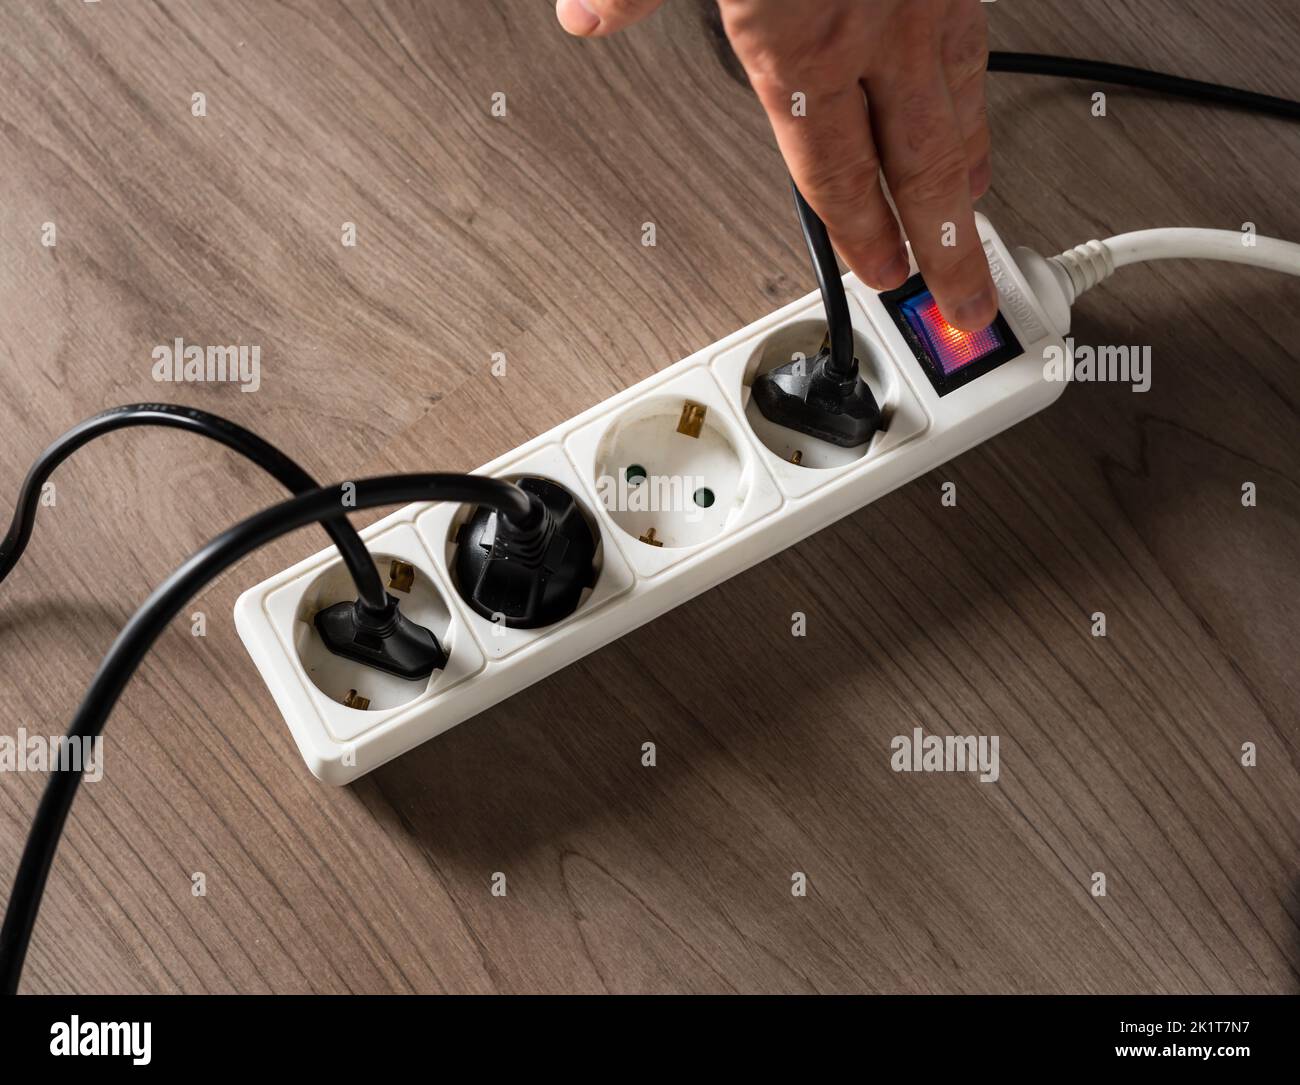 A man cutting off the electrical current by turning off the button on a white electrical socket to reduce energy consumption Stock Photo